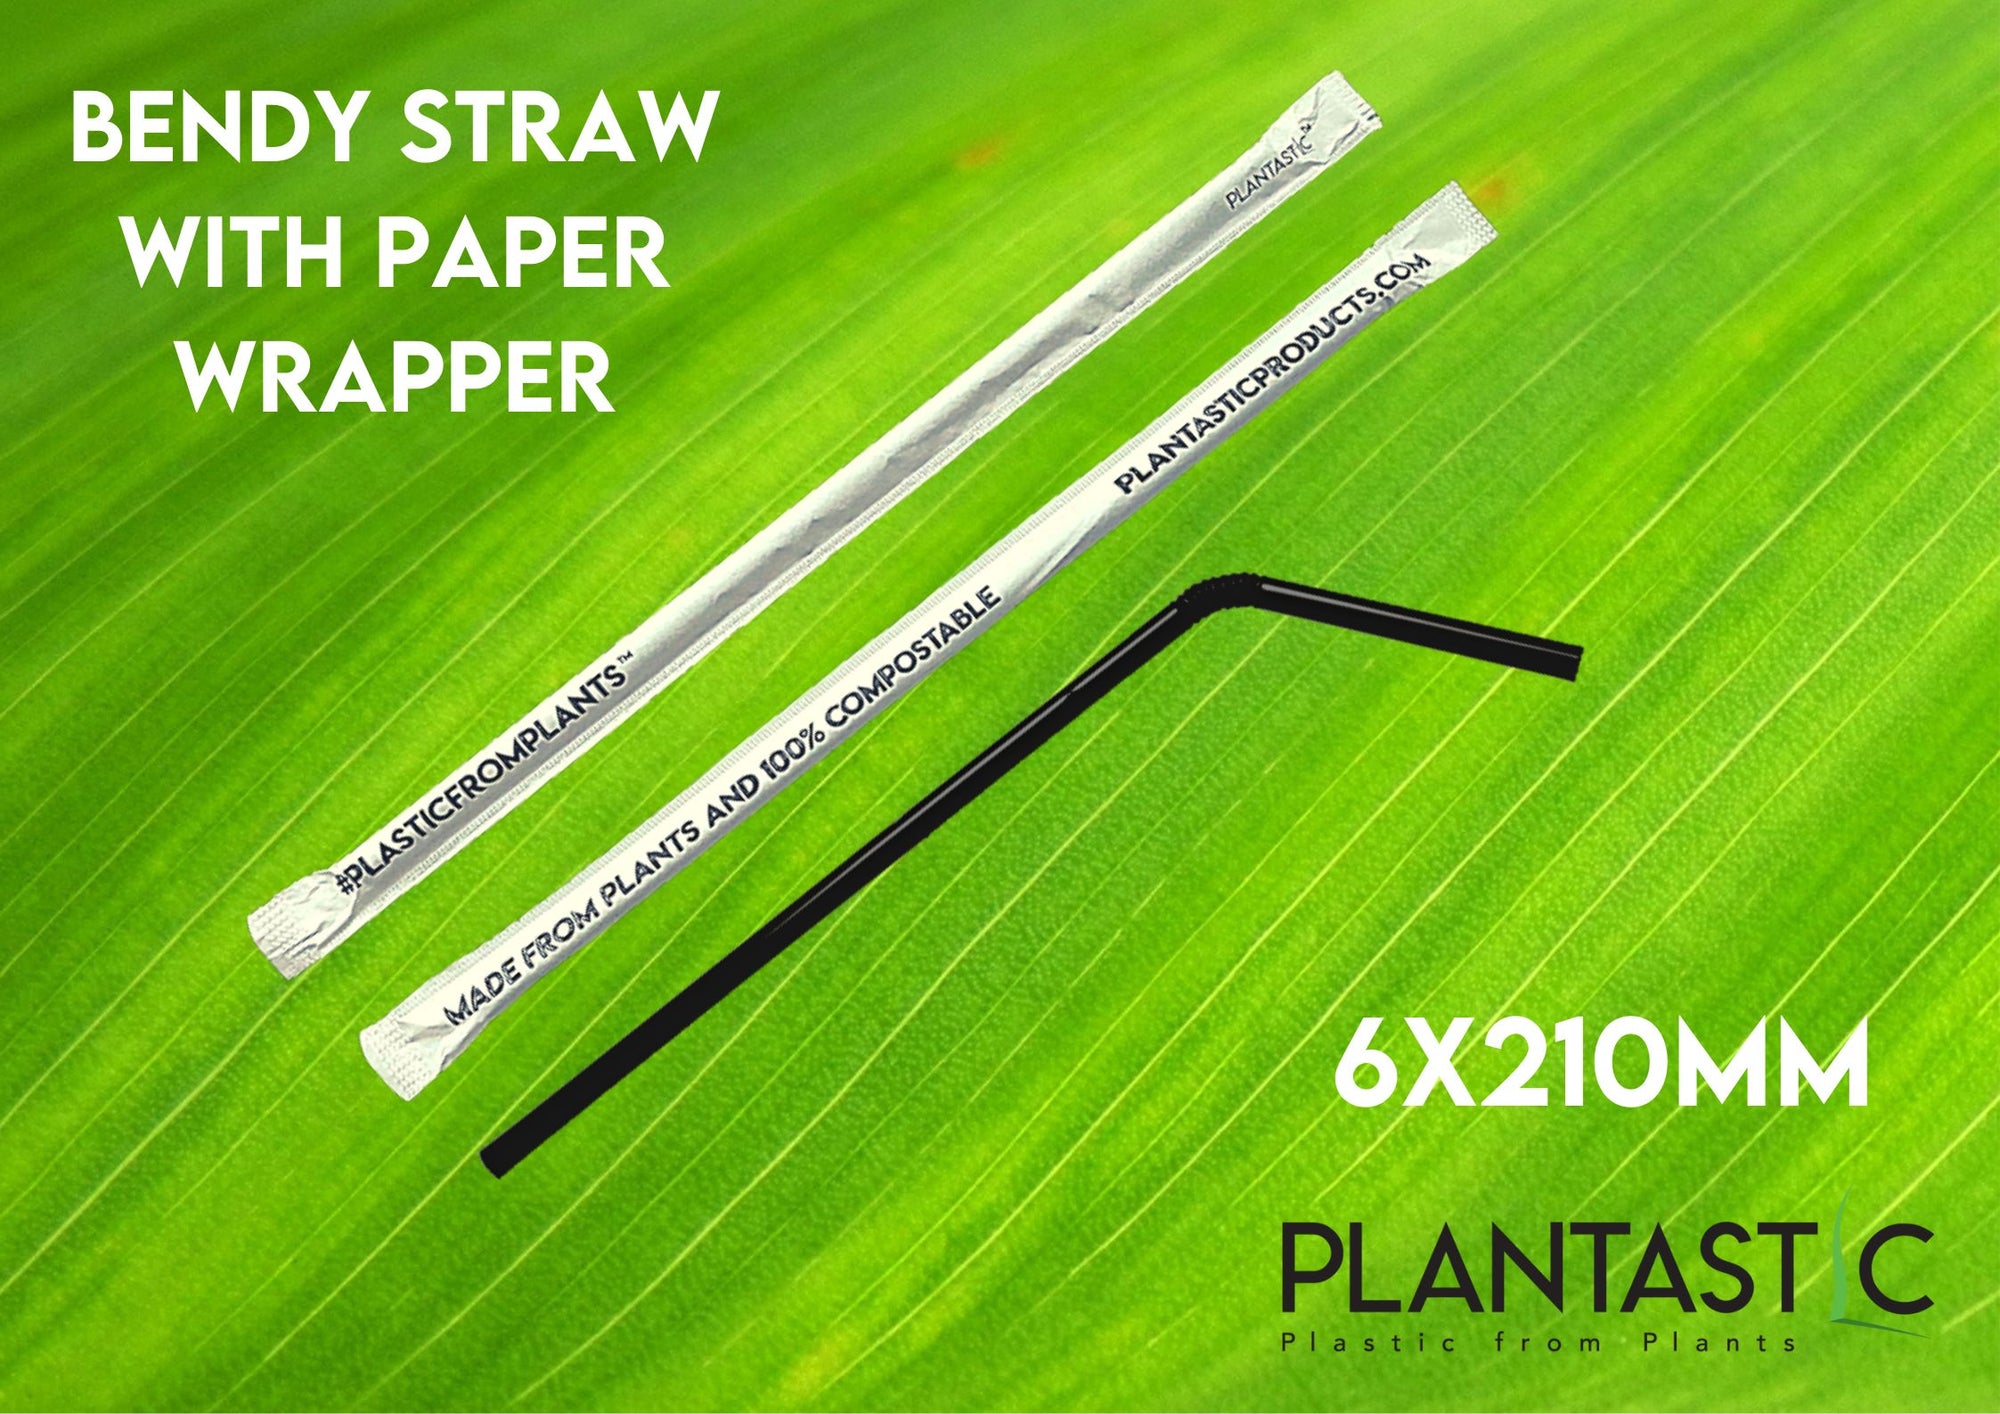 Box of 250 6x210mm Bendy Biodegradable and Compostable Straws in Paper Wrap